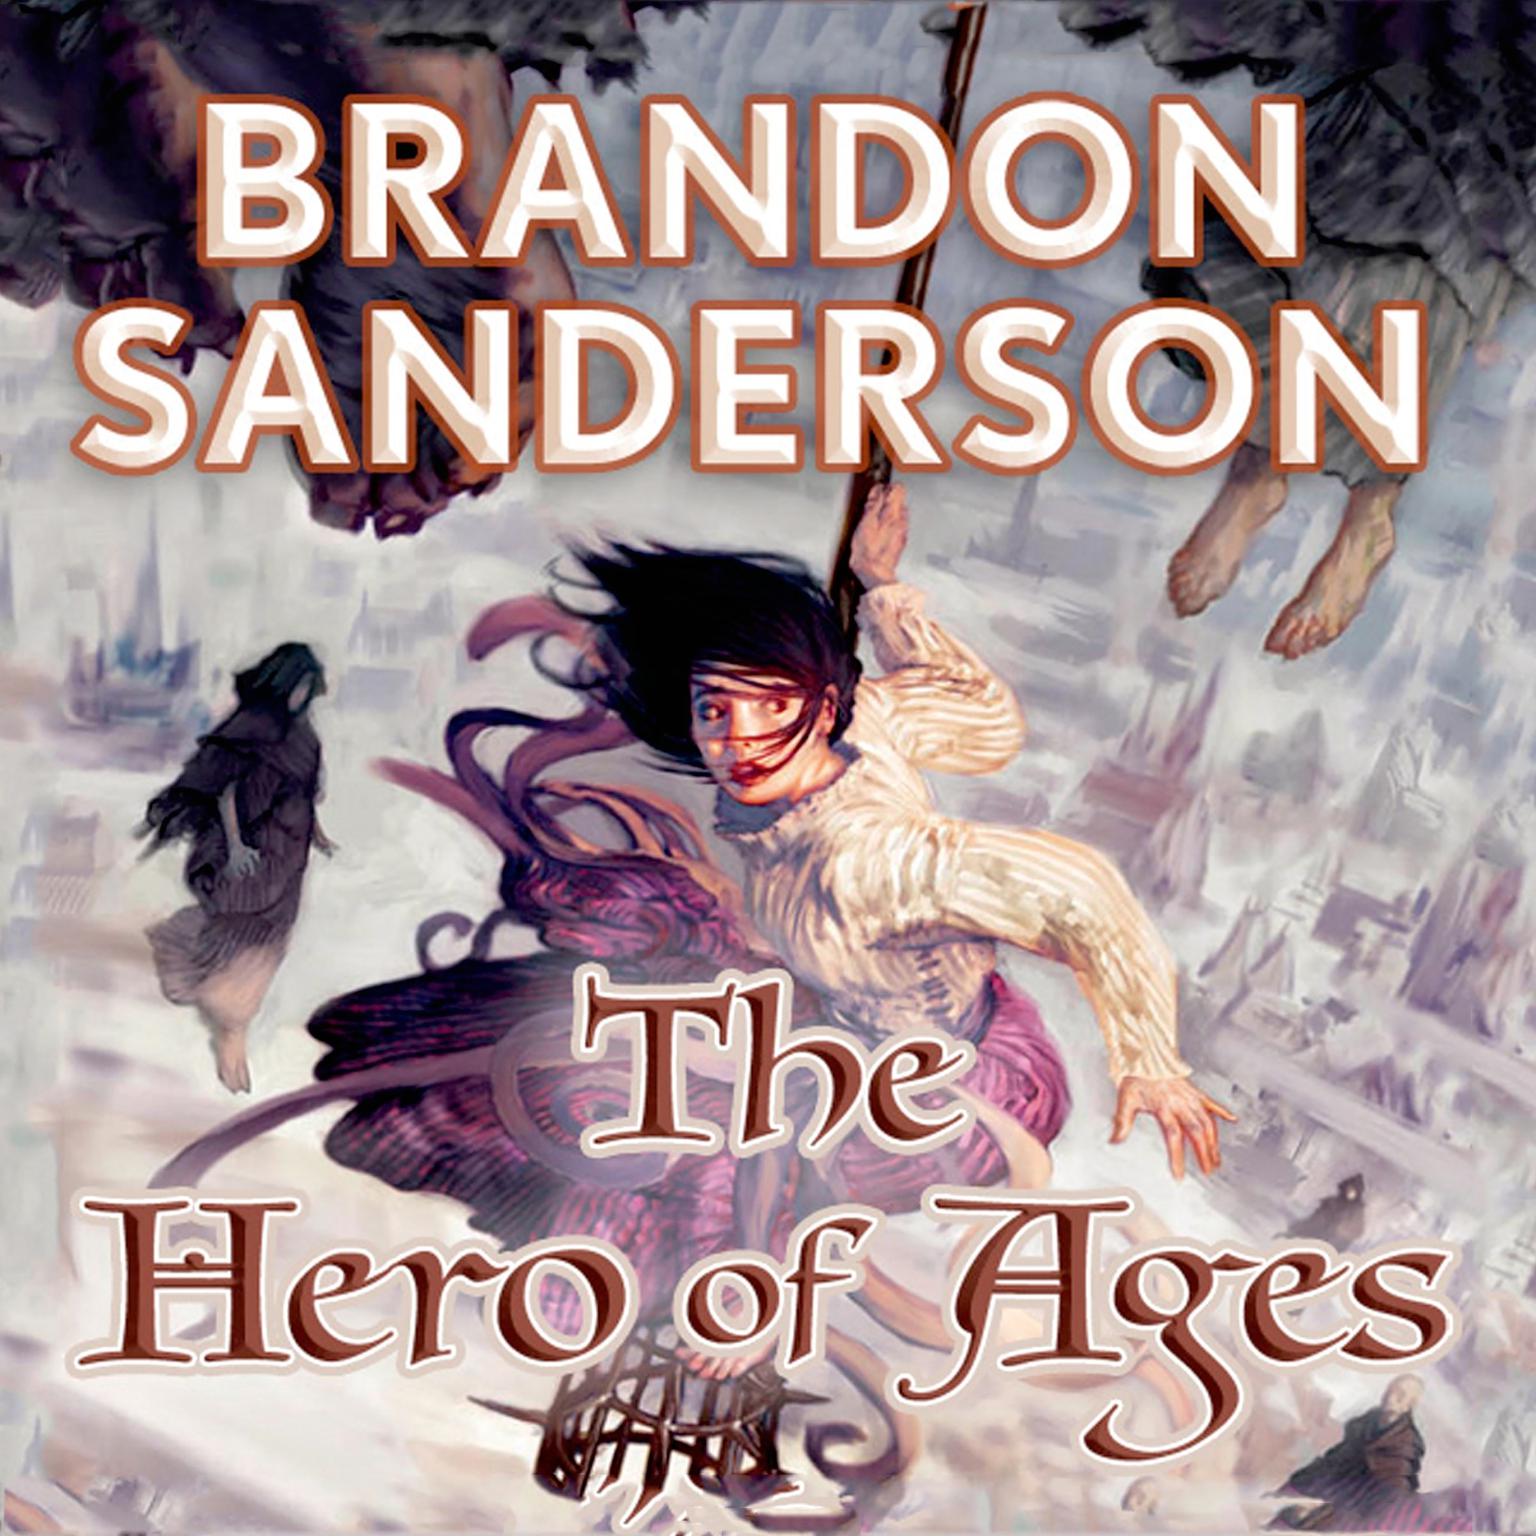 The Hero of Ages: Book Three of Mistborn Audiobook, by Brandon Sanderson